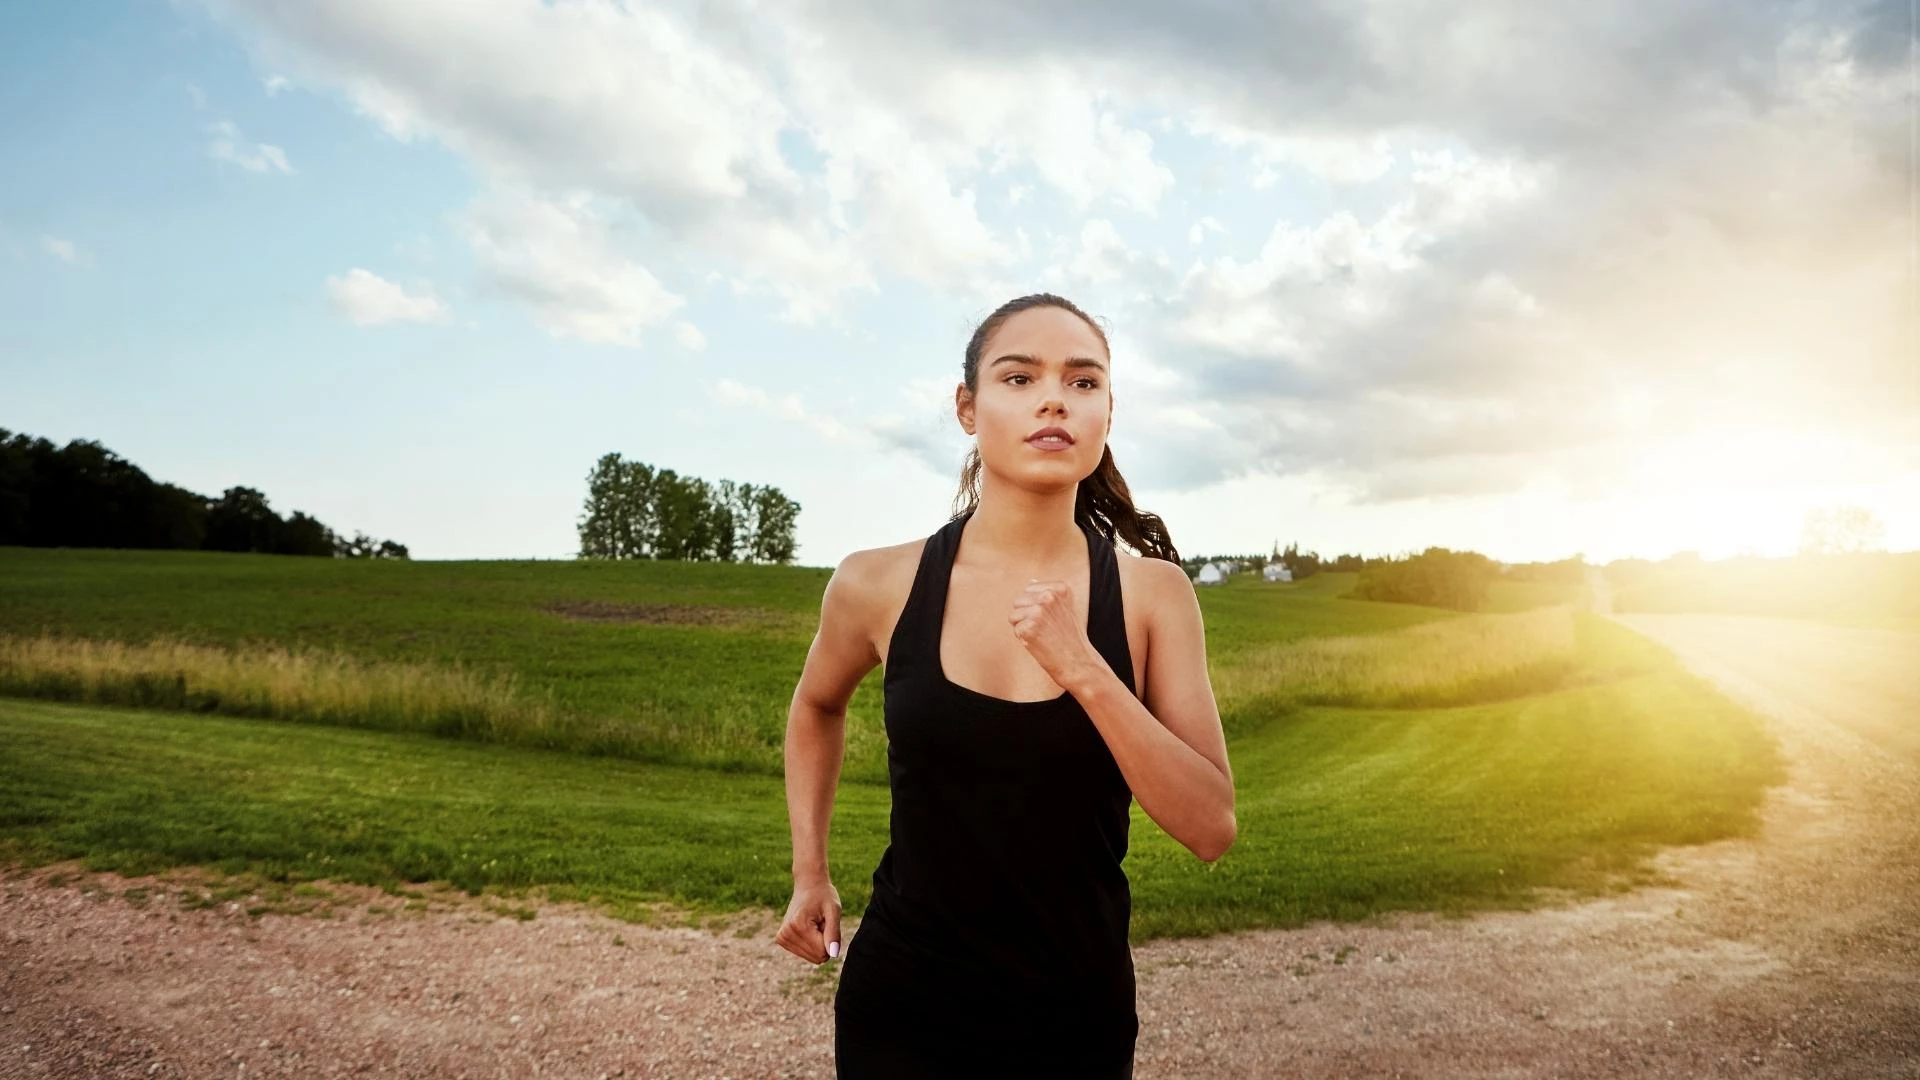 What are 11 Important Tips for Gaining Self-Discipline?